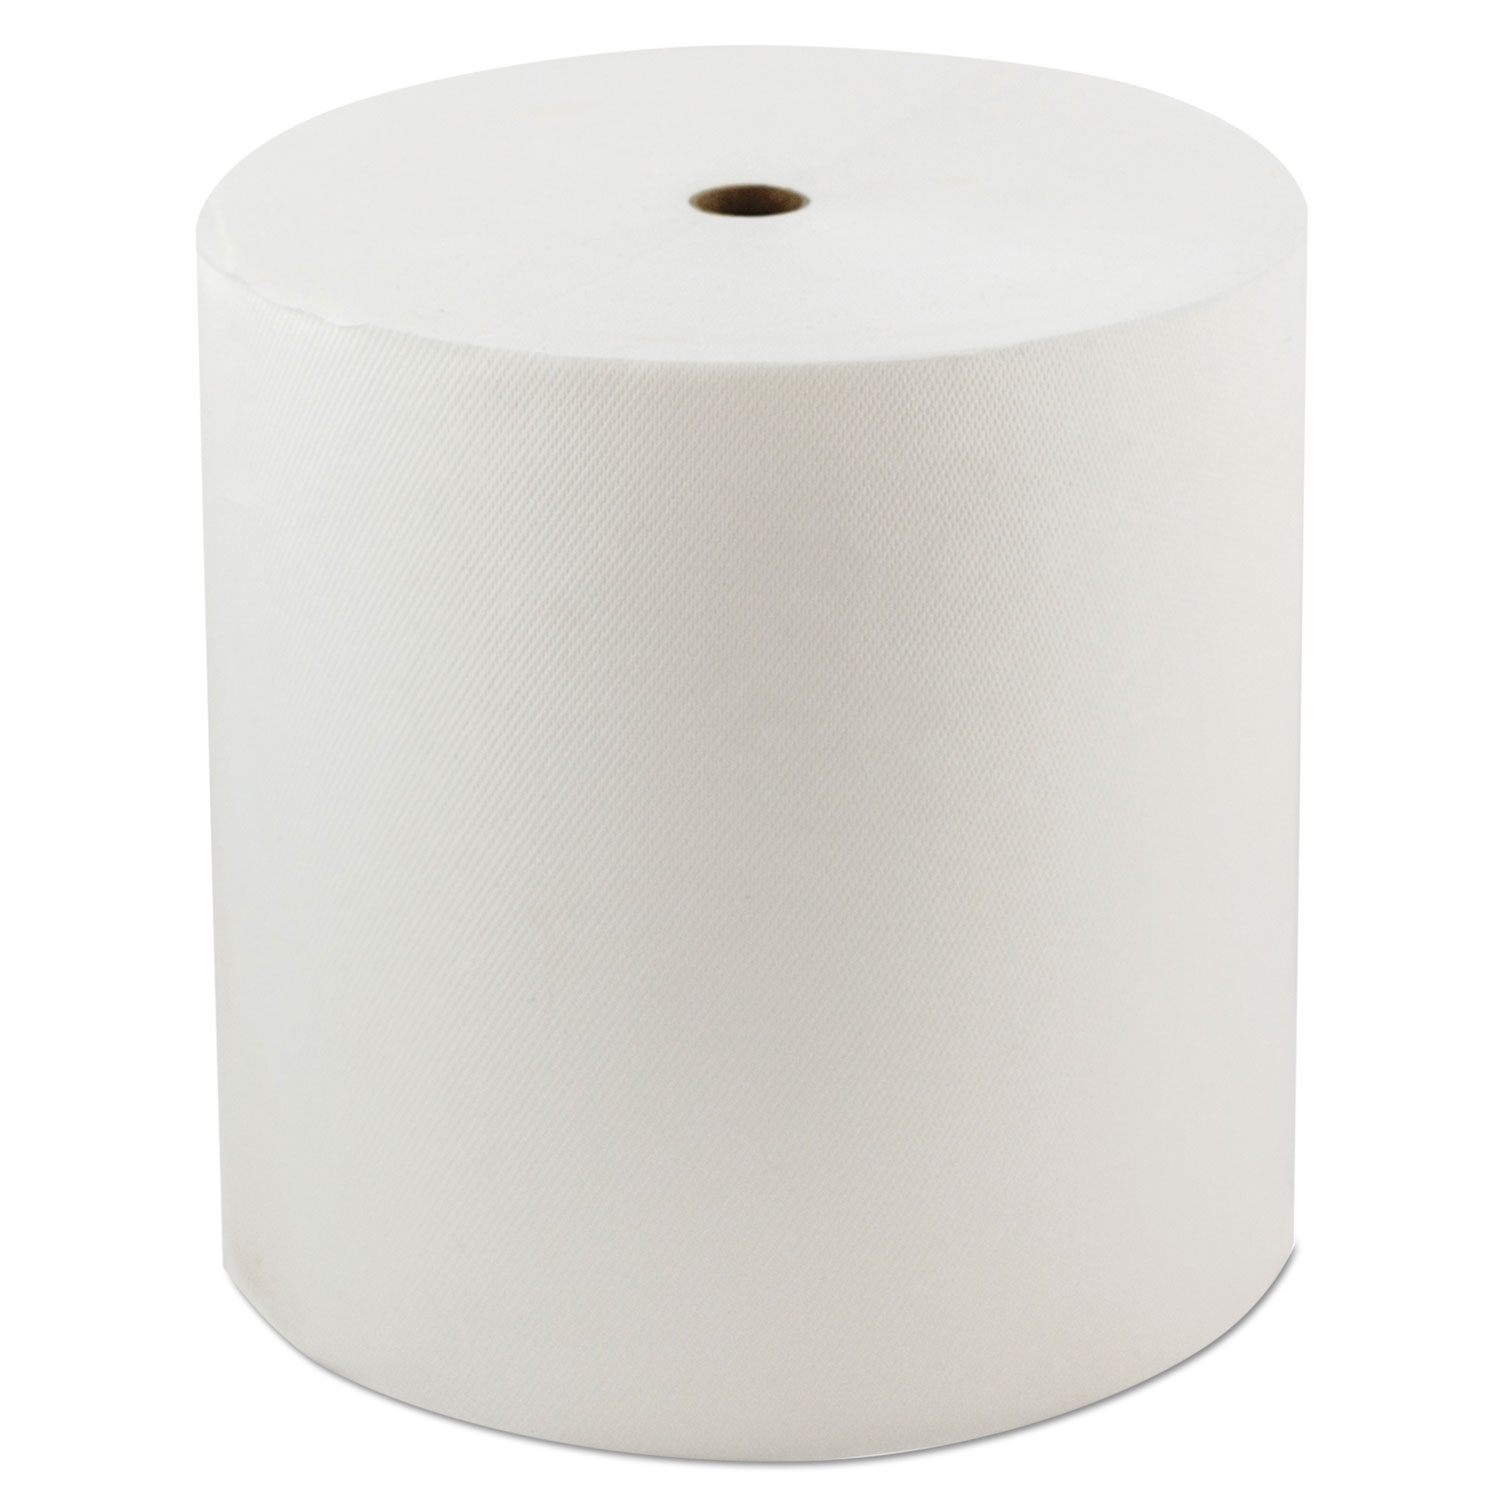  Morcon Tissue VW888 Valay Proprietary Roll Towels, 1-Ply, 8 x 800 ft, White, 6 Rolls/Carton (MORVW888) 